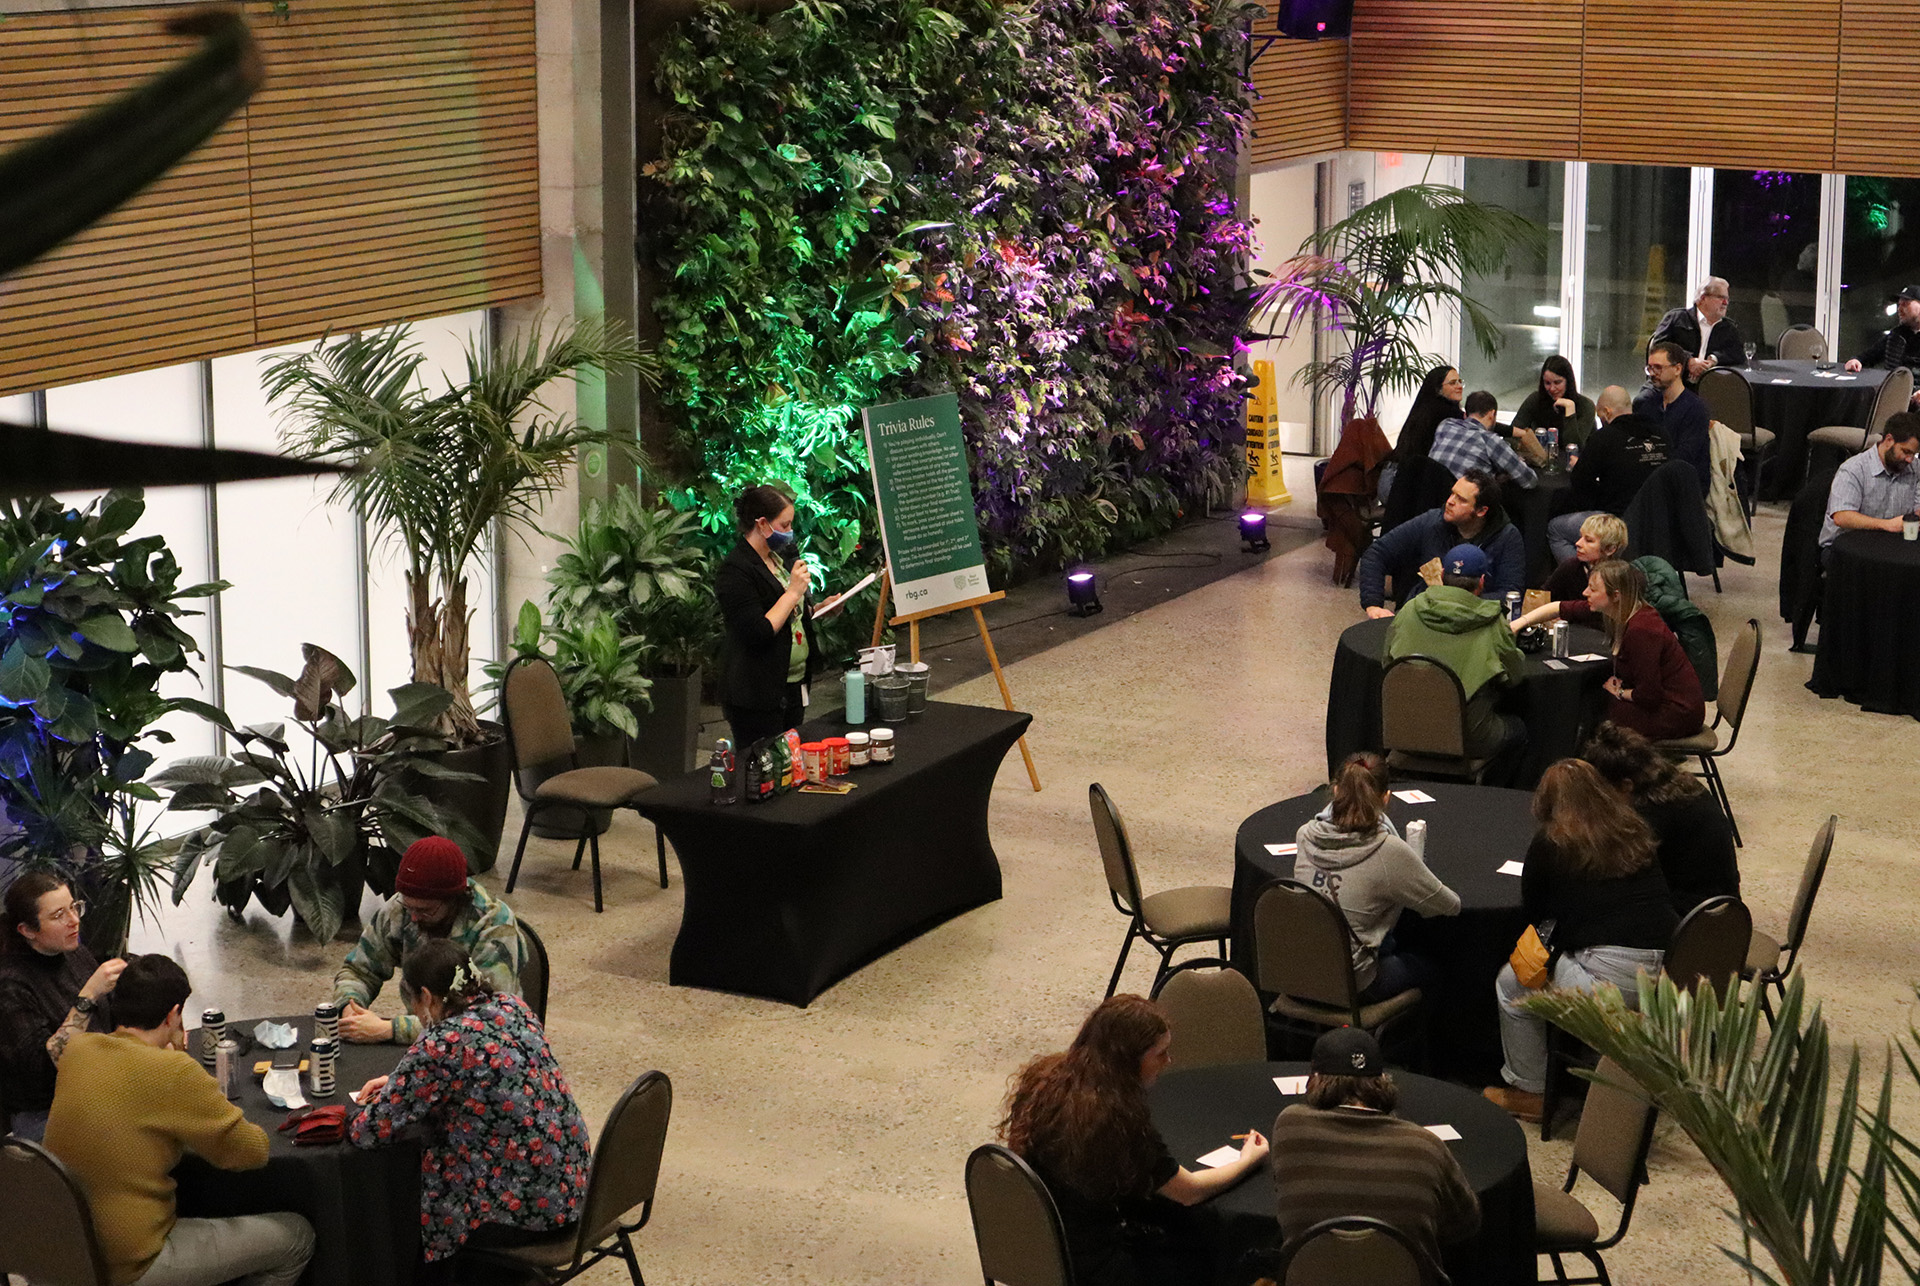 Groups seating at small tables in the atrium participating in pub trivia